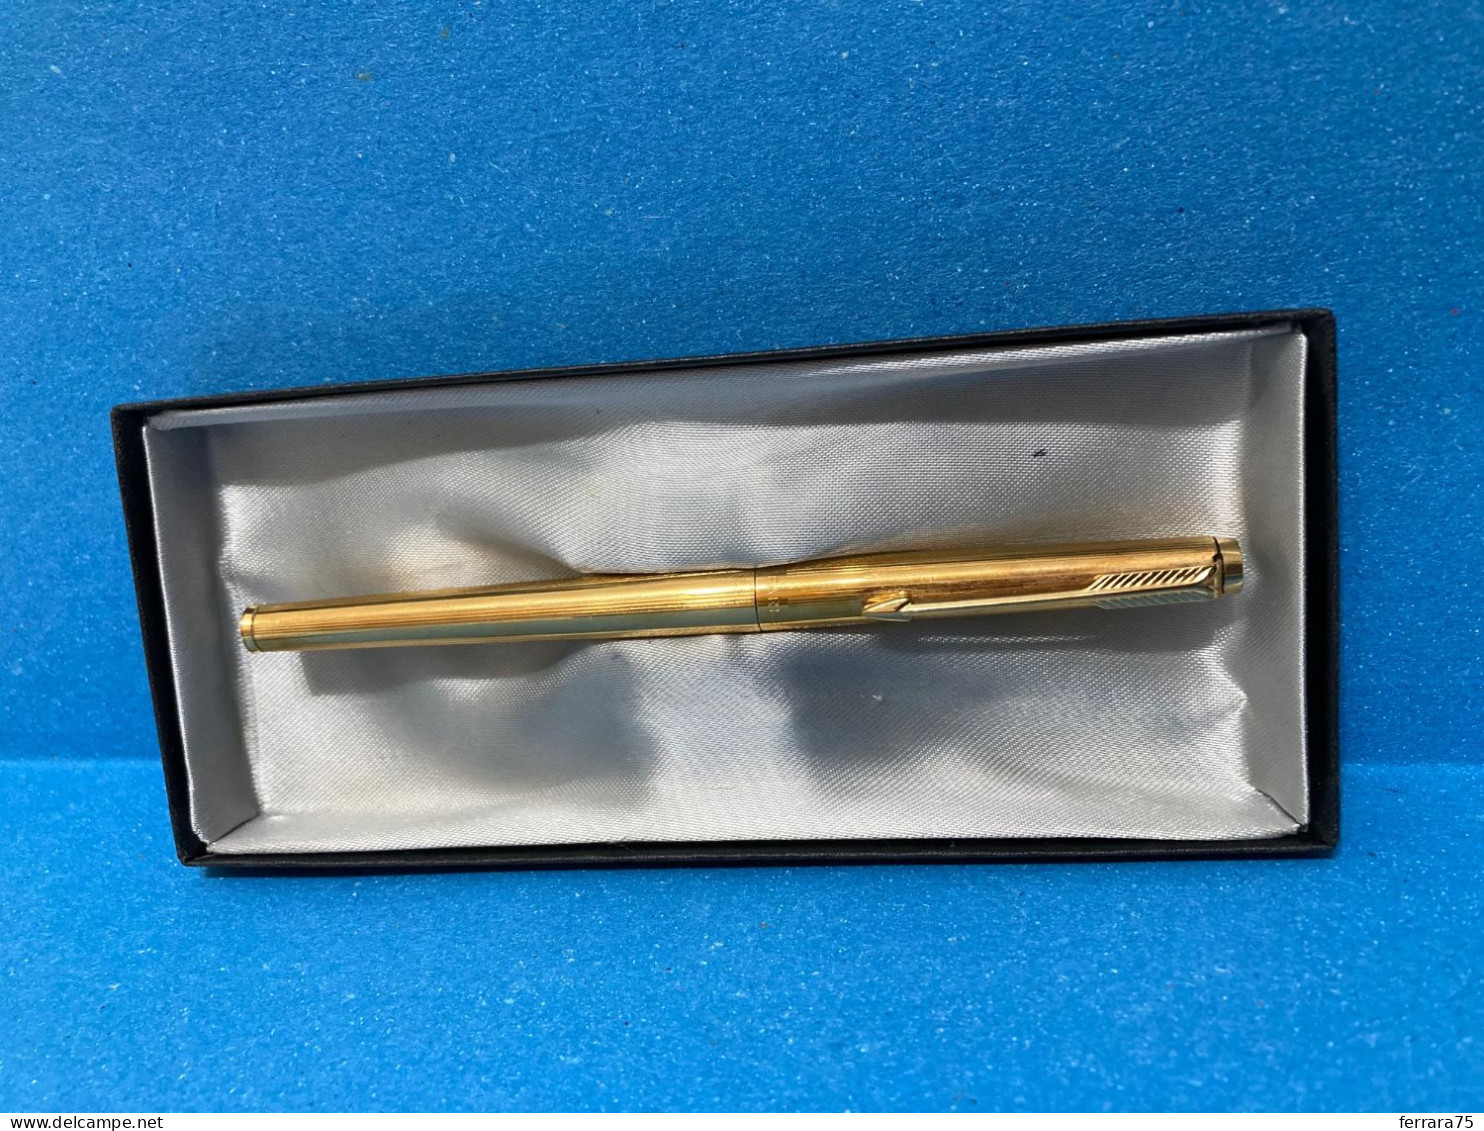 PENNA A SFERA PARKER MADE IN USA VINTAGE GOLD PLATED.? CON SCATOLA. - Penne